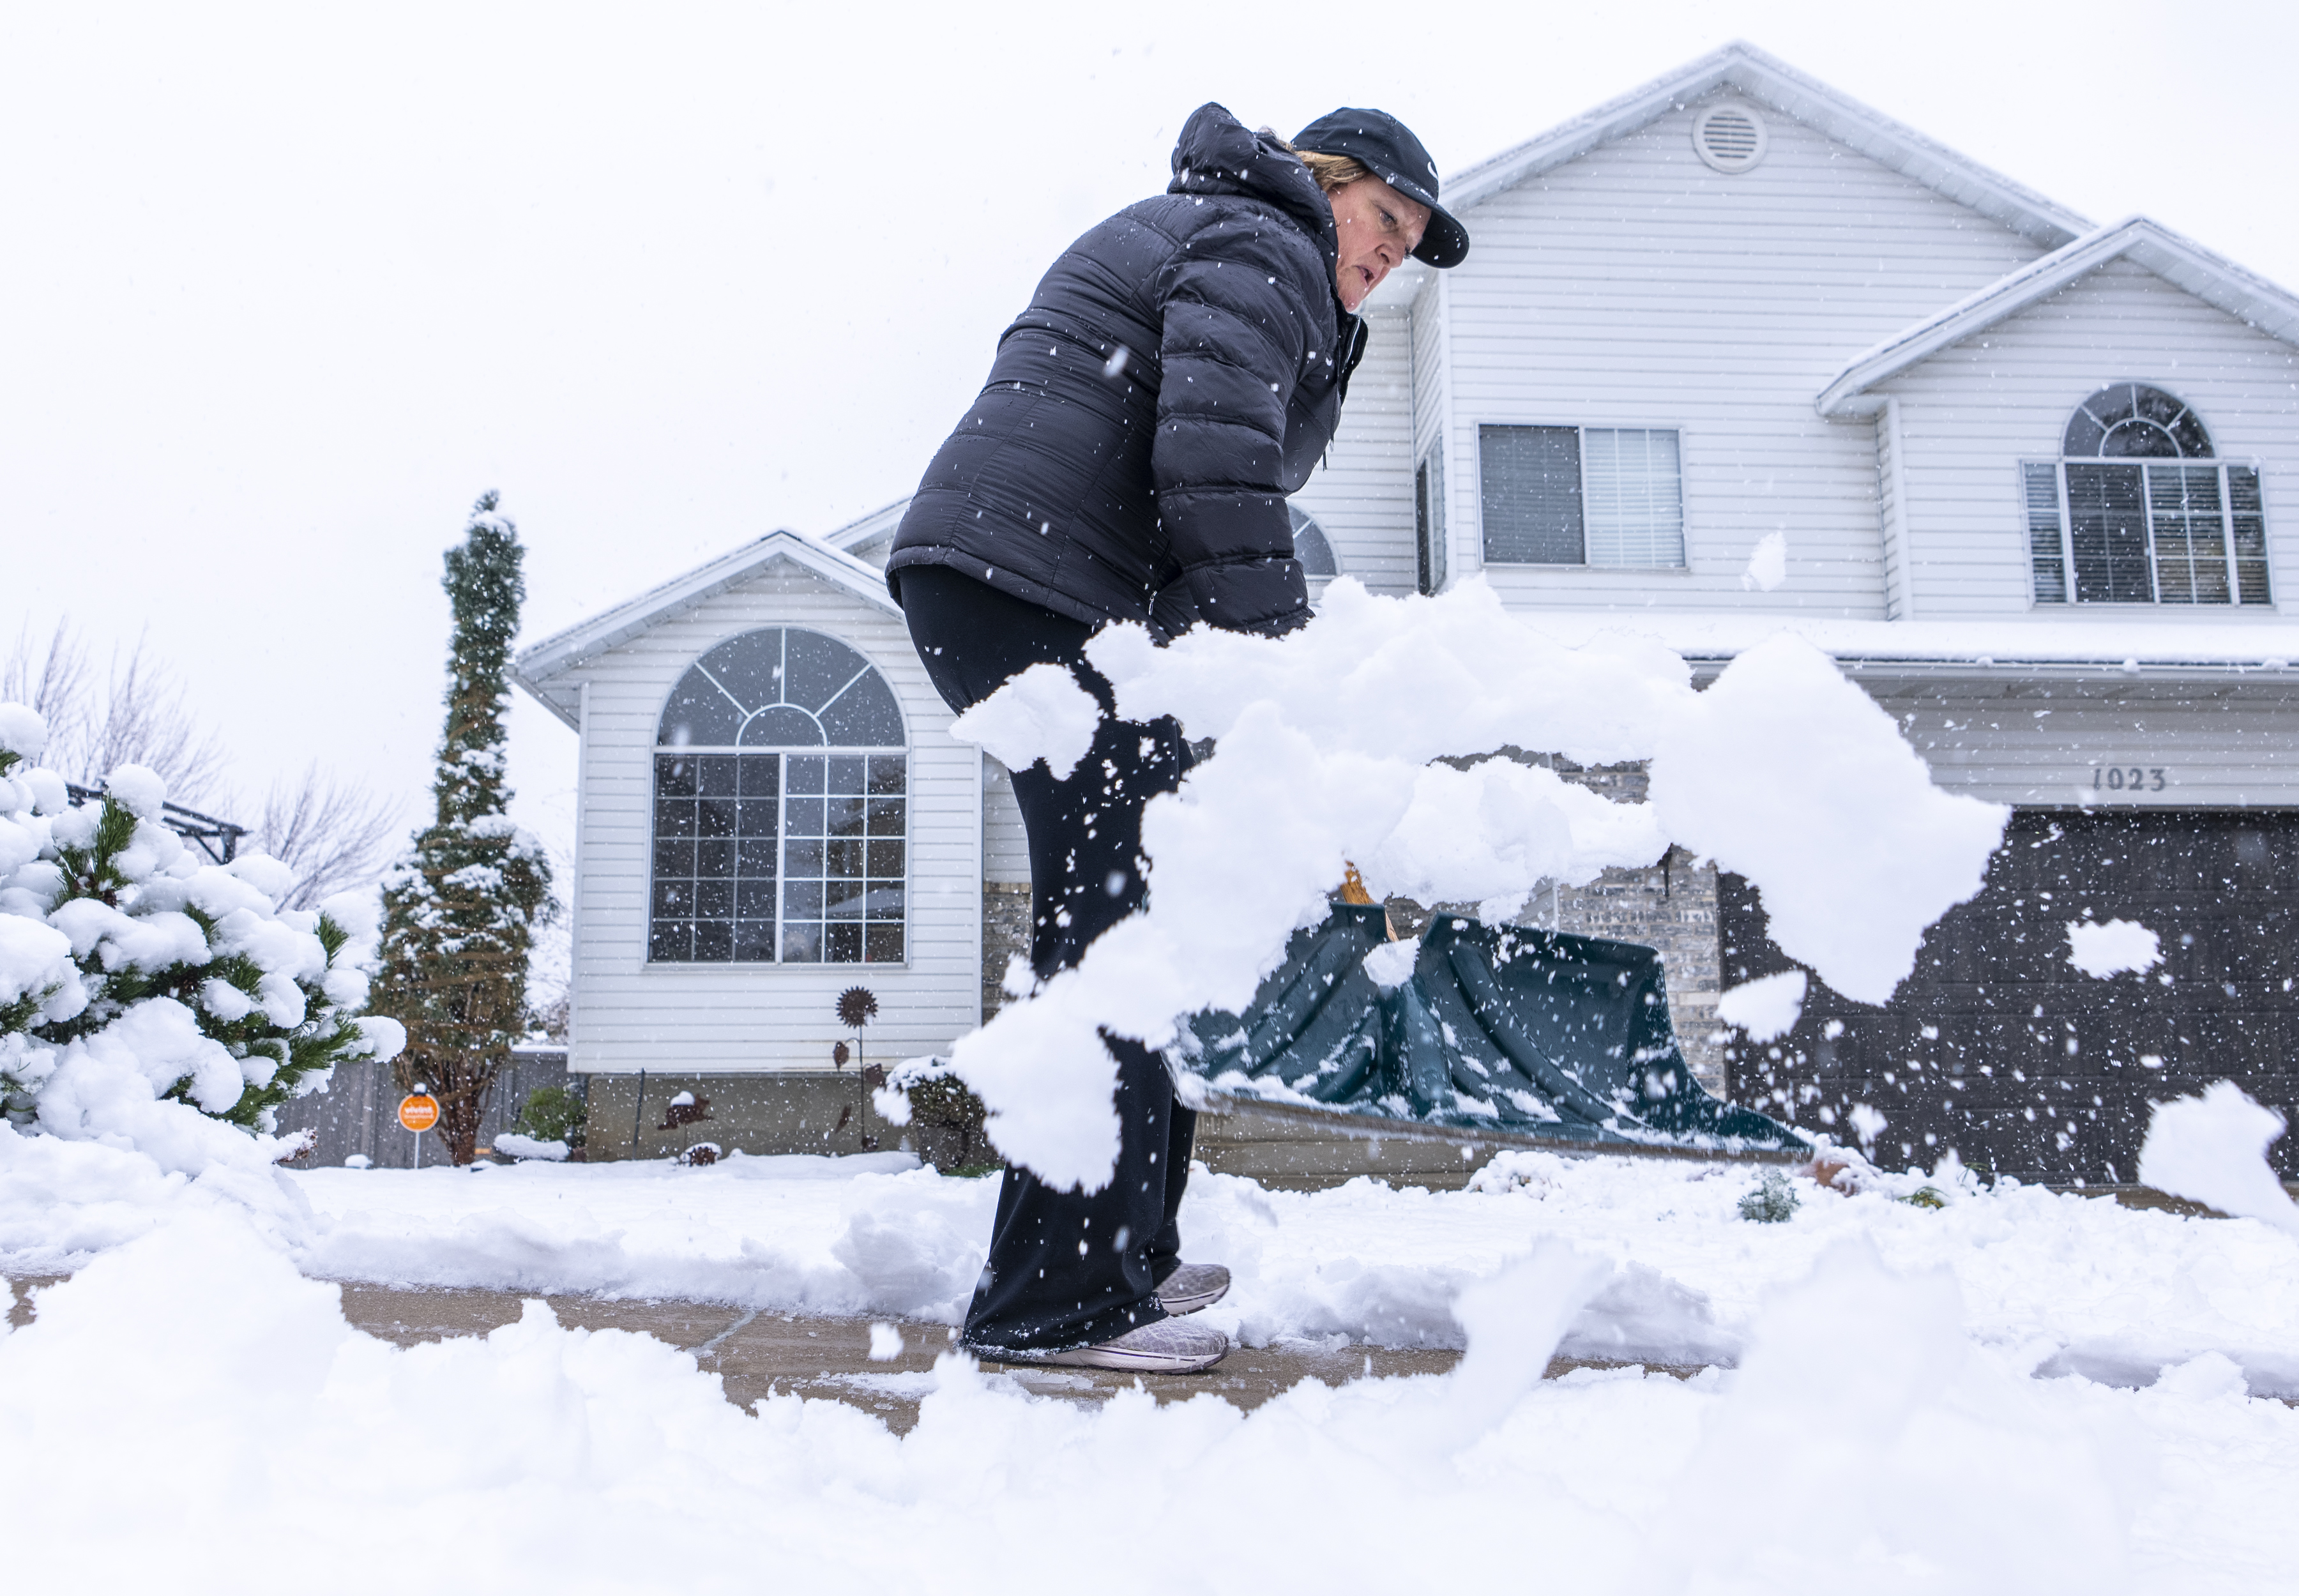 The Winter 2021-2022 Outlook is in! What should Utahns expect